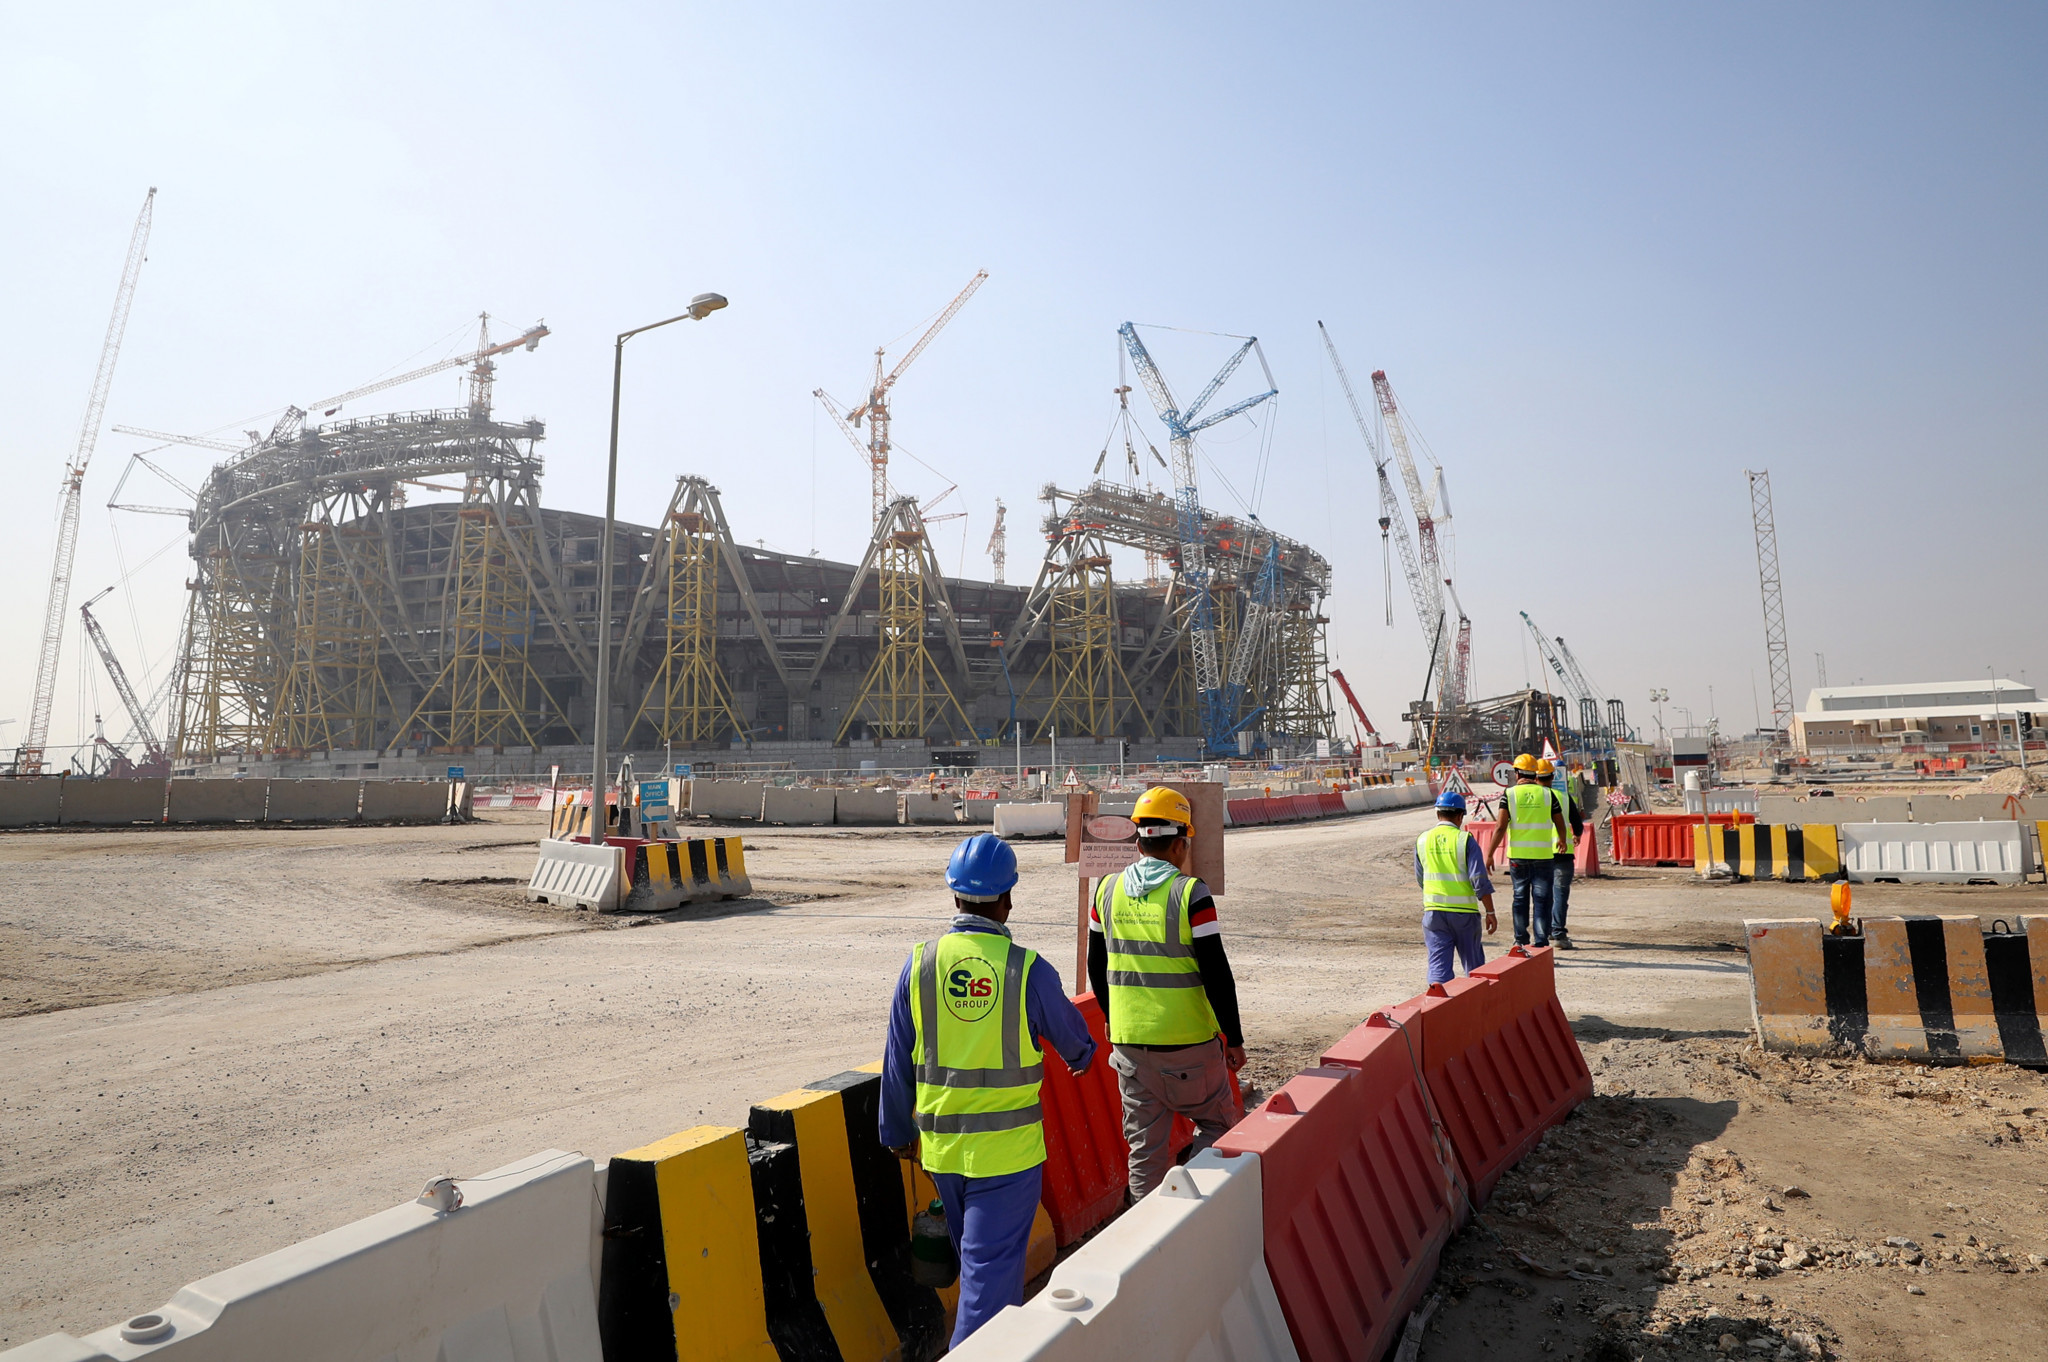 Qatar has faced criticism over migrants' rights at construction sites for the 2022 FIFA World Cup ©Getty Images